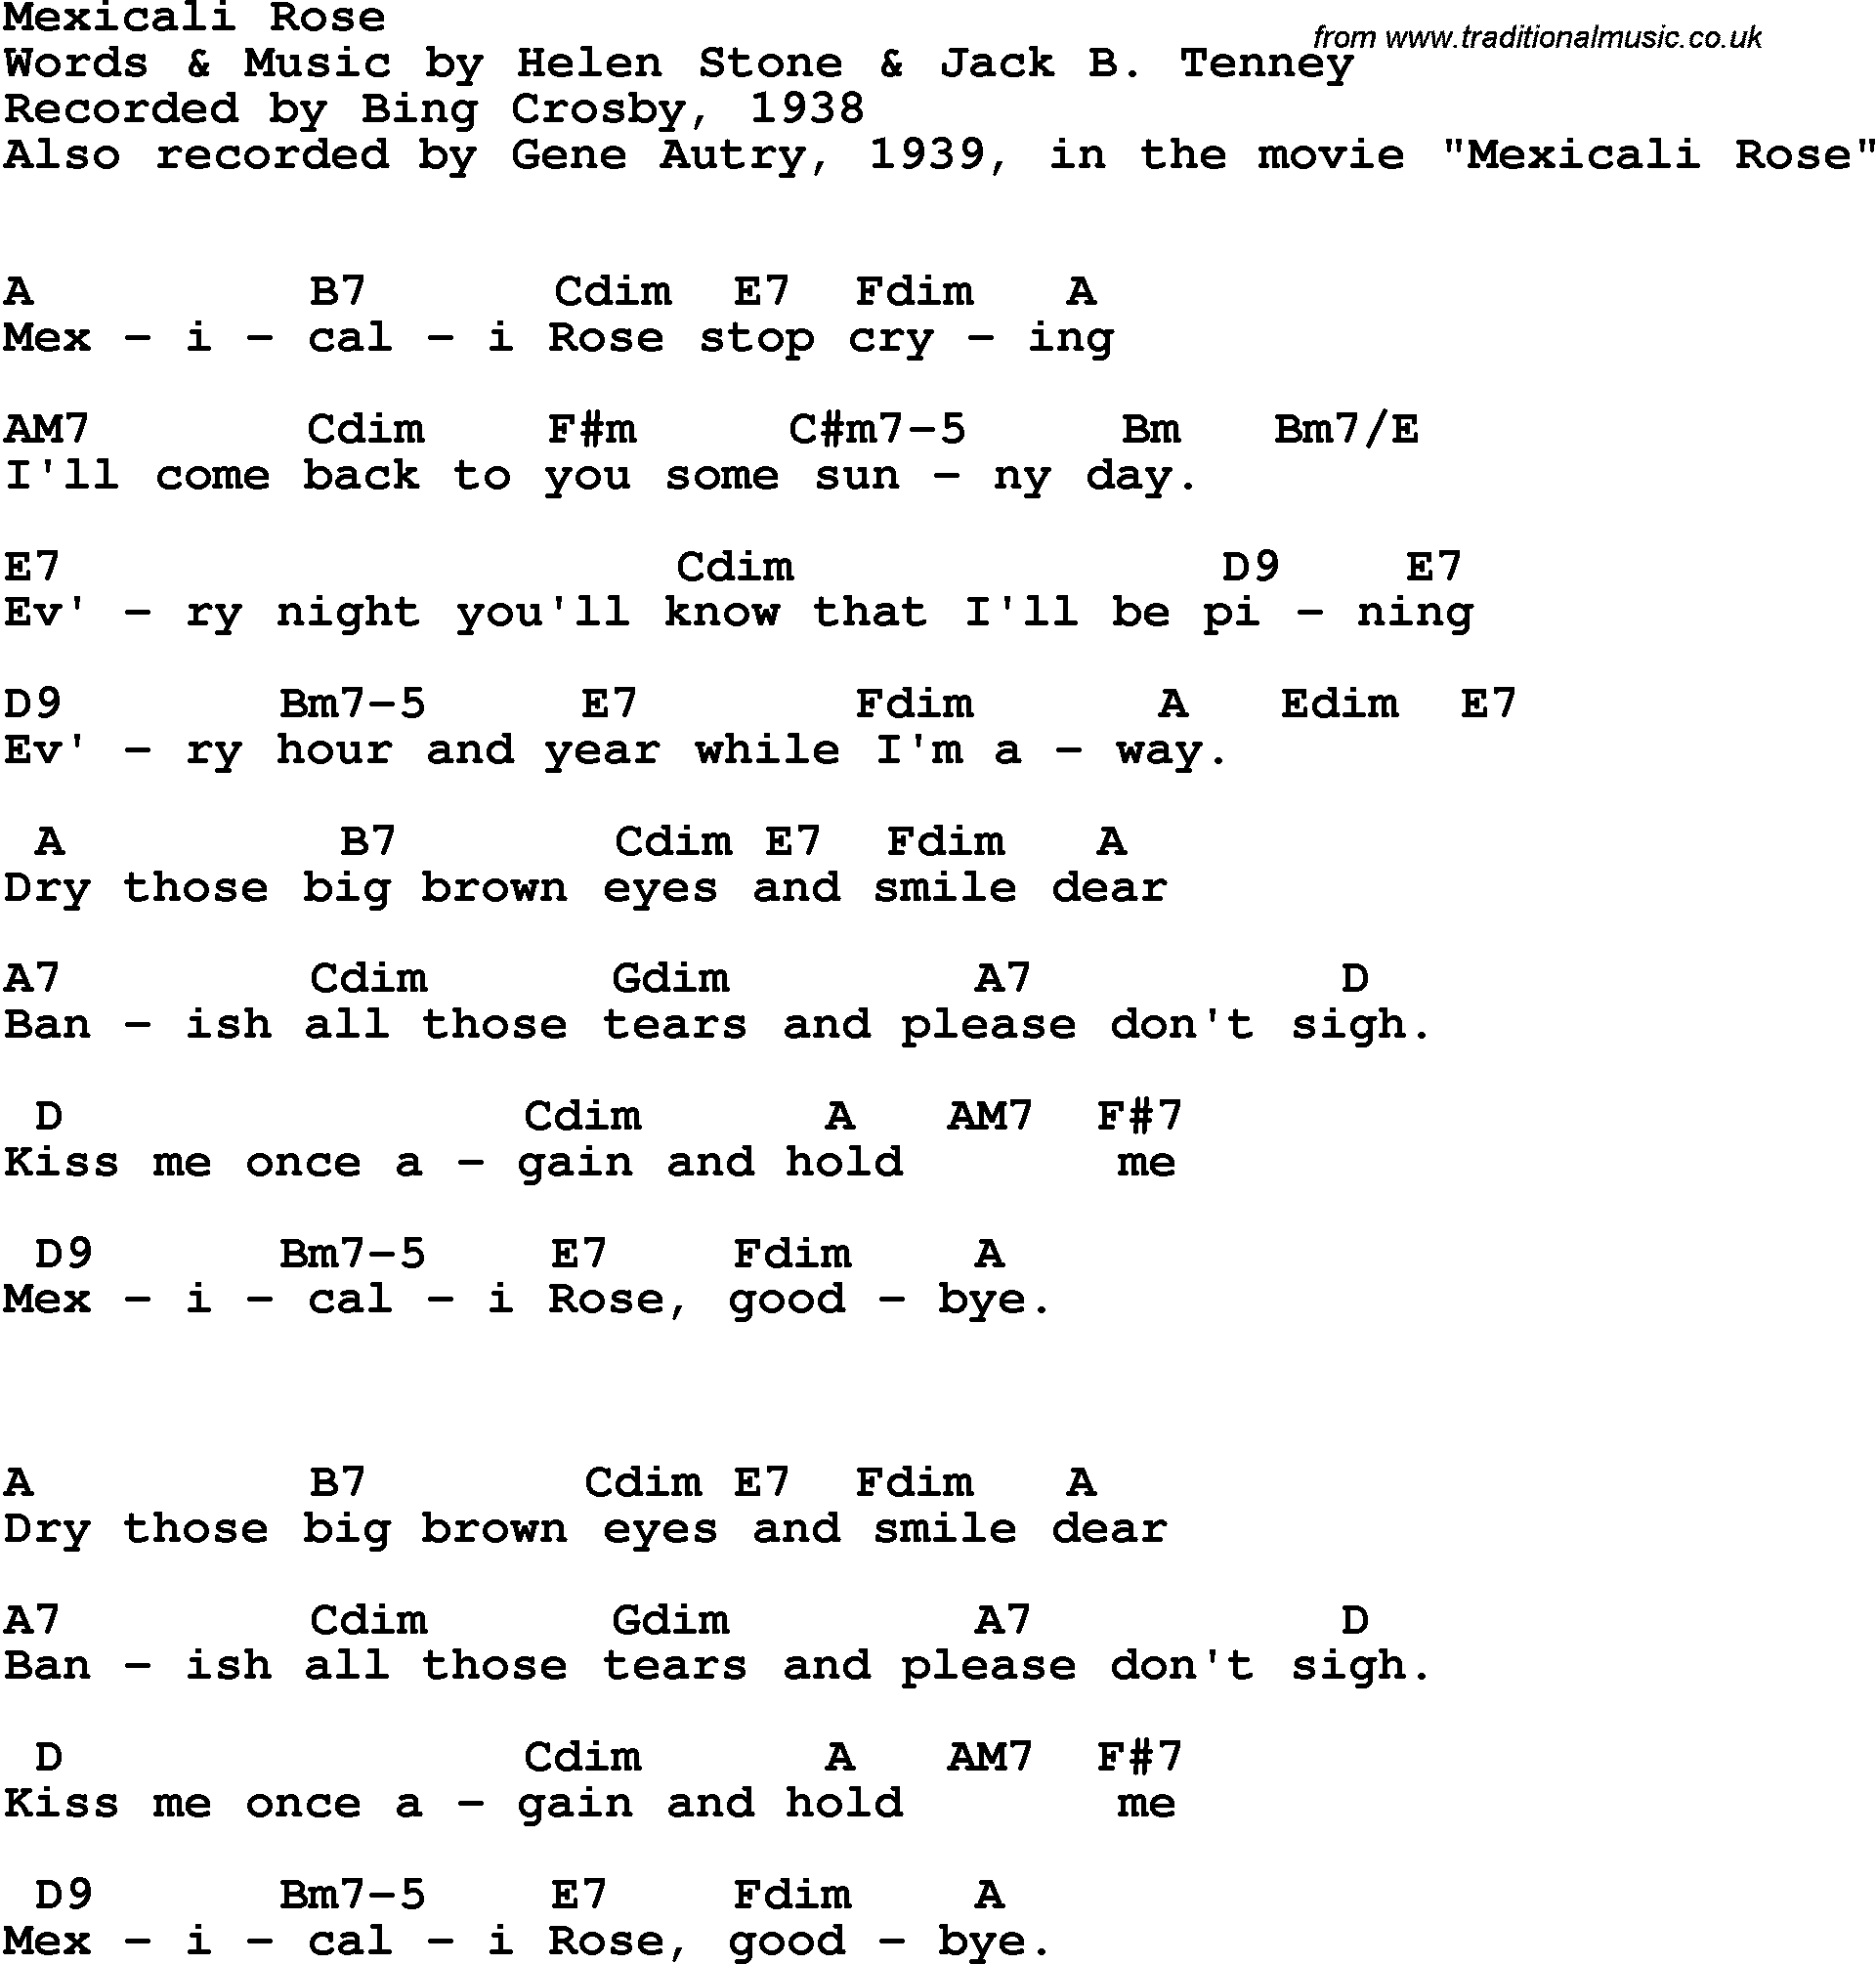 Song lyrics with guitar chords for Mexicali Rose - Bing Crosby, 1938